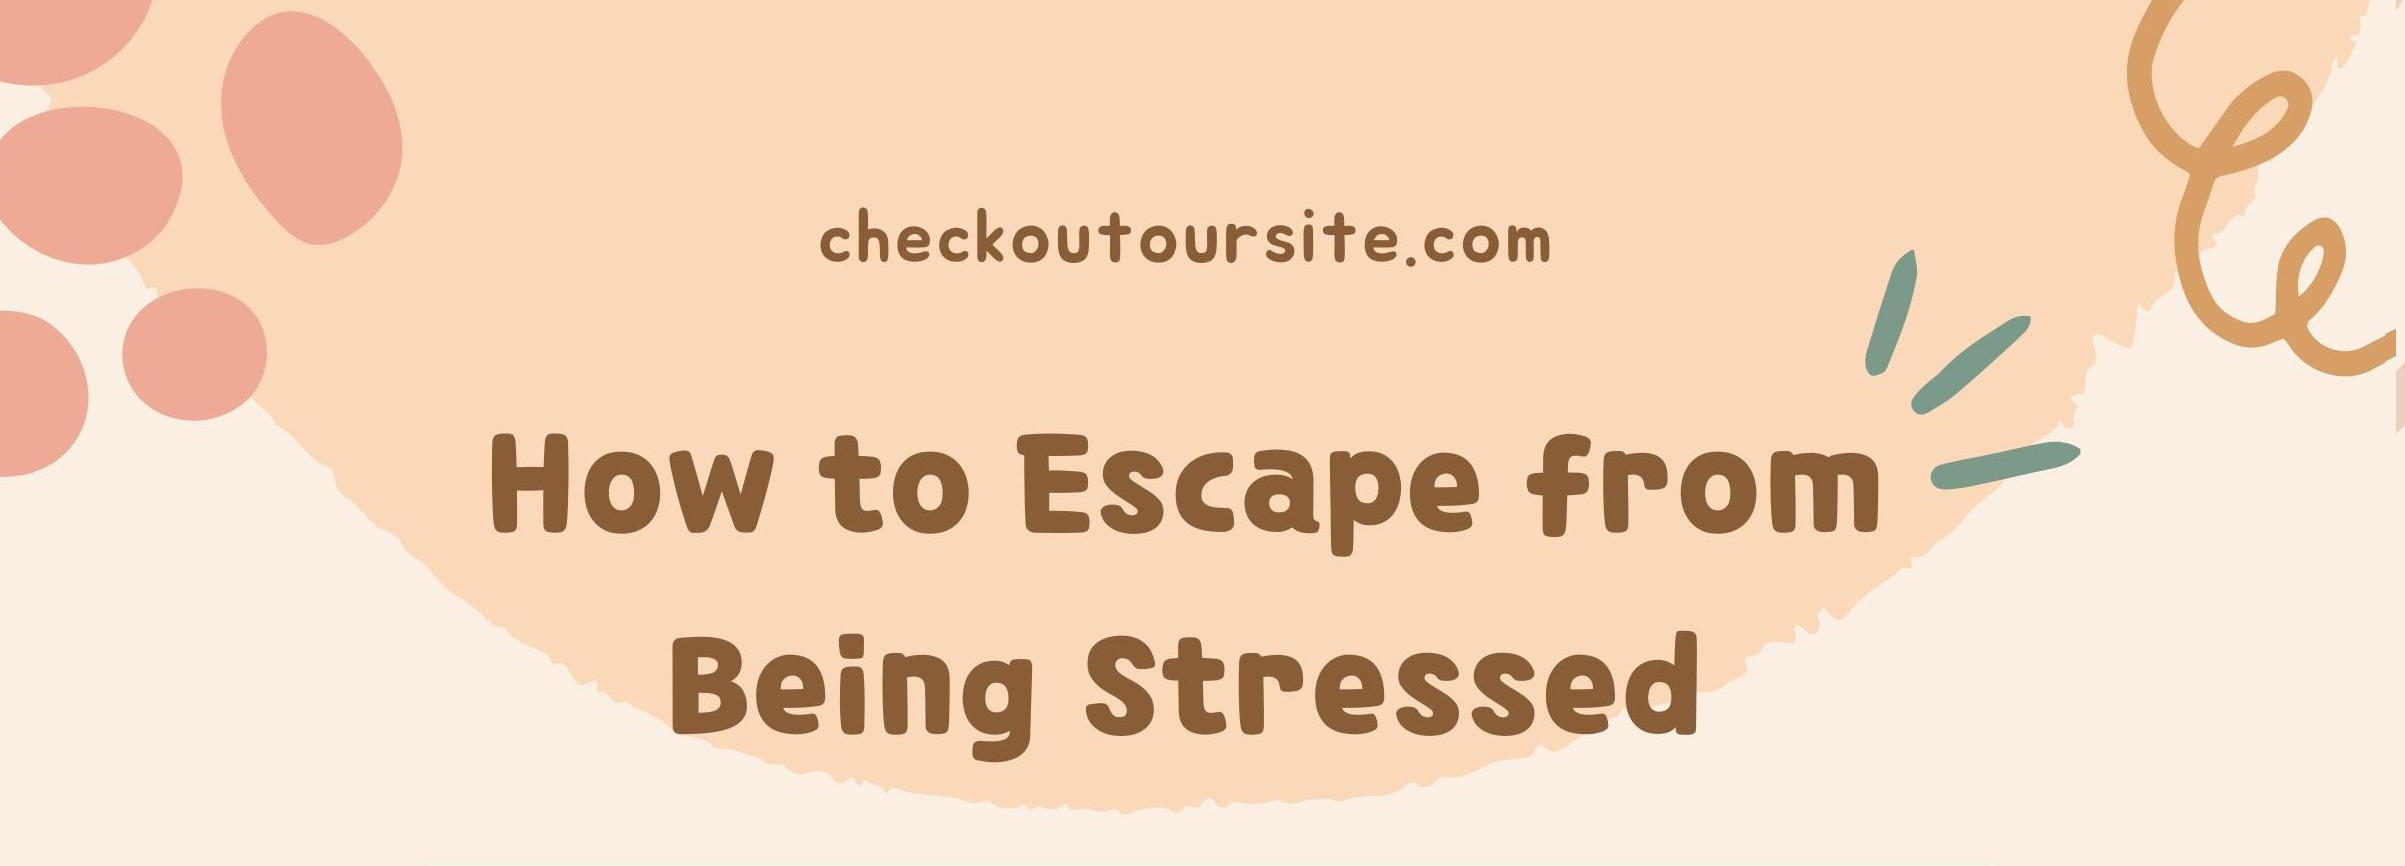 How to escape from being stressed.